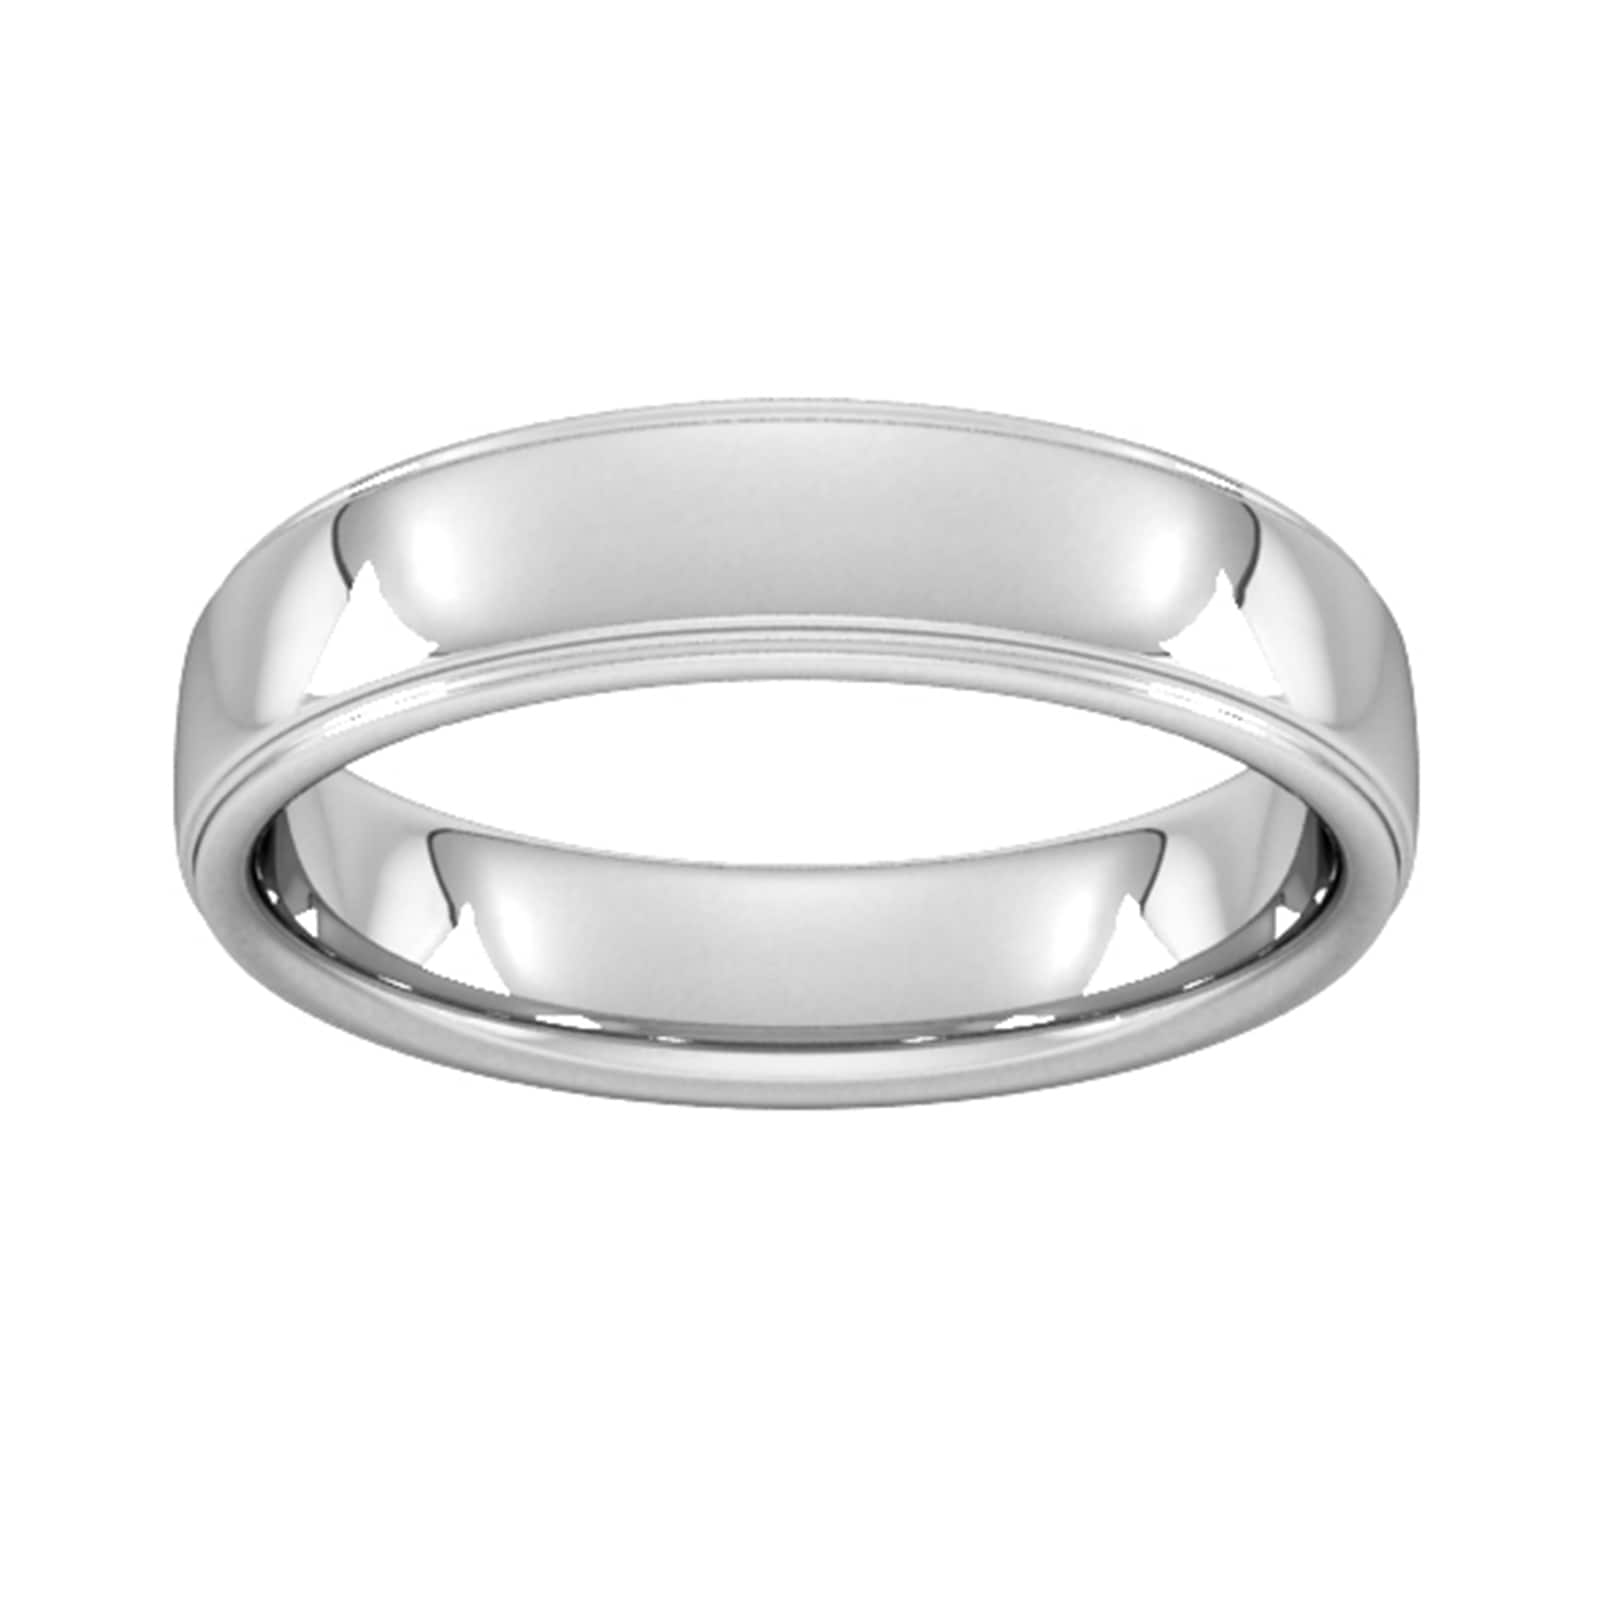 5mm Slight Court Standard Polished Finish With Grooves Wedding Ring In 18 Carat White Gold - Ring Size R